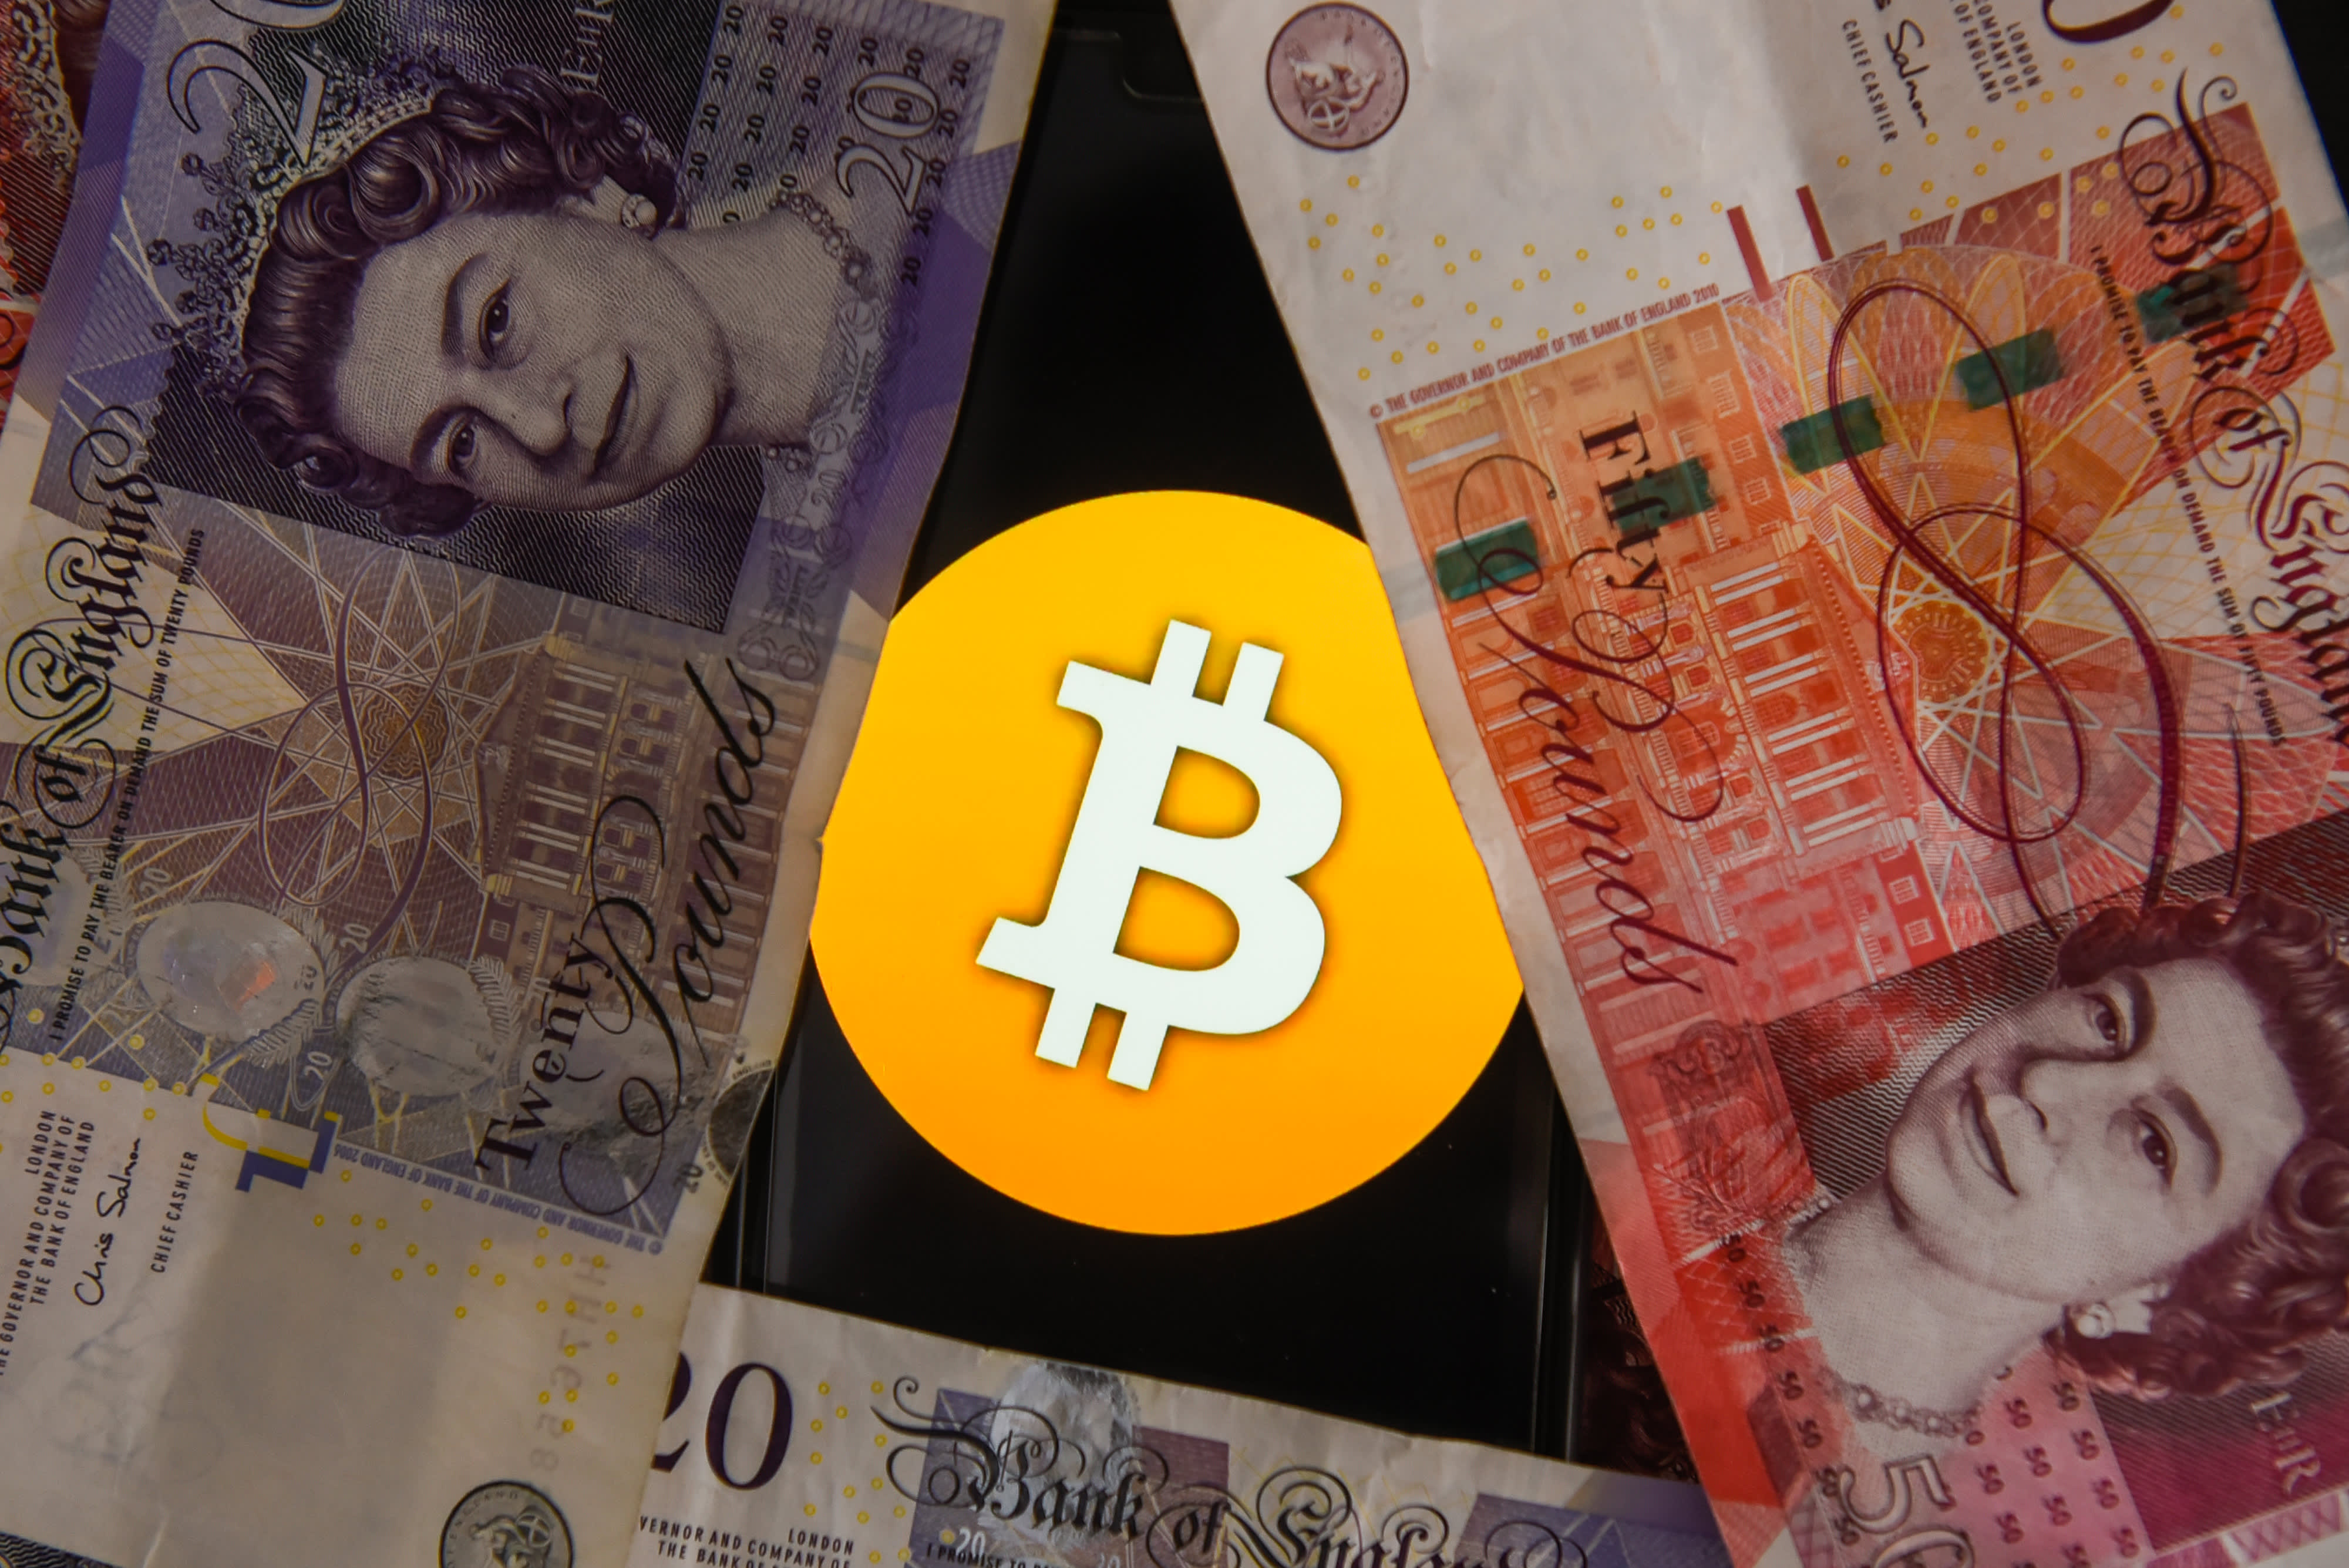 BTC to GBP | Sell Bitcoin in the UK